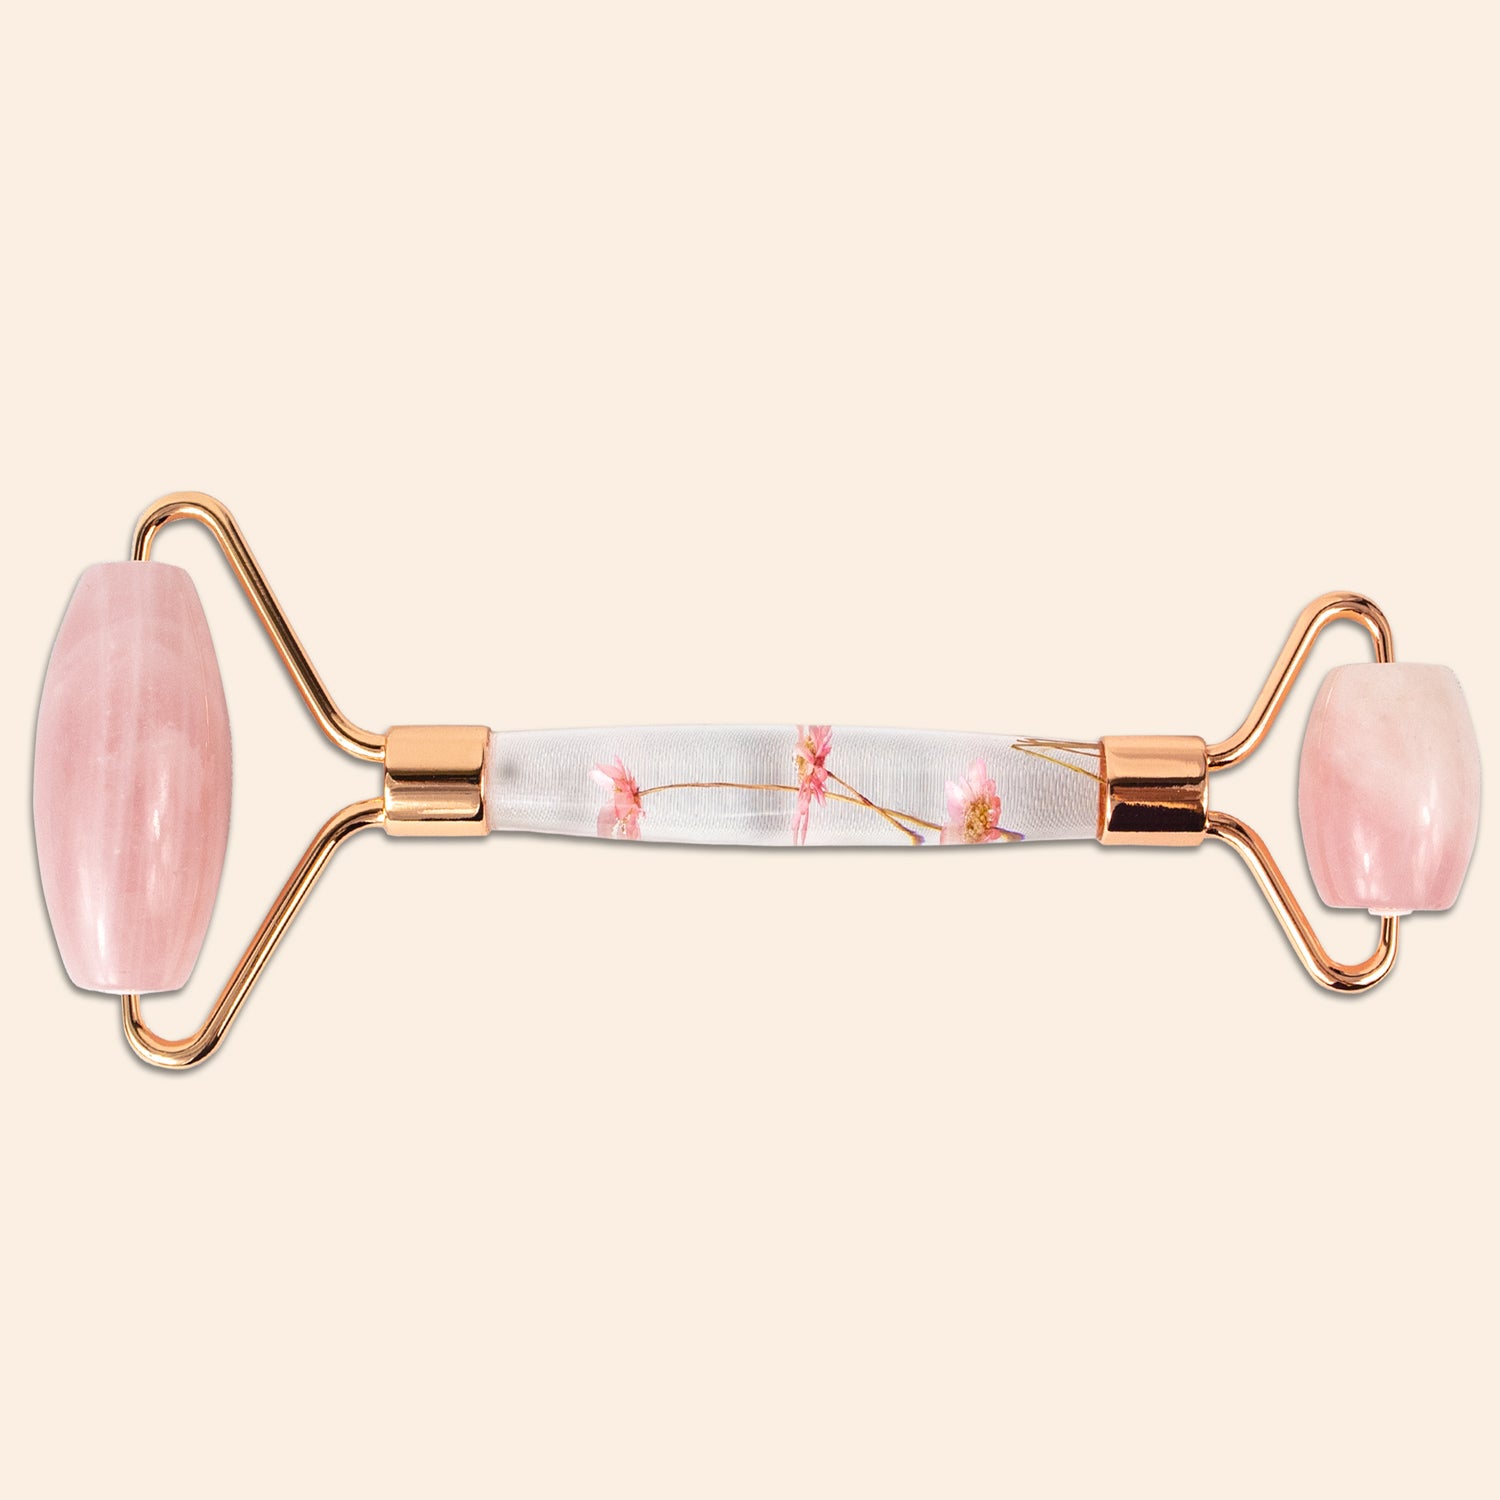 Natural Rose Quartz Roller for Anti-Inflammation and Lymphatic Drainage